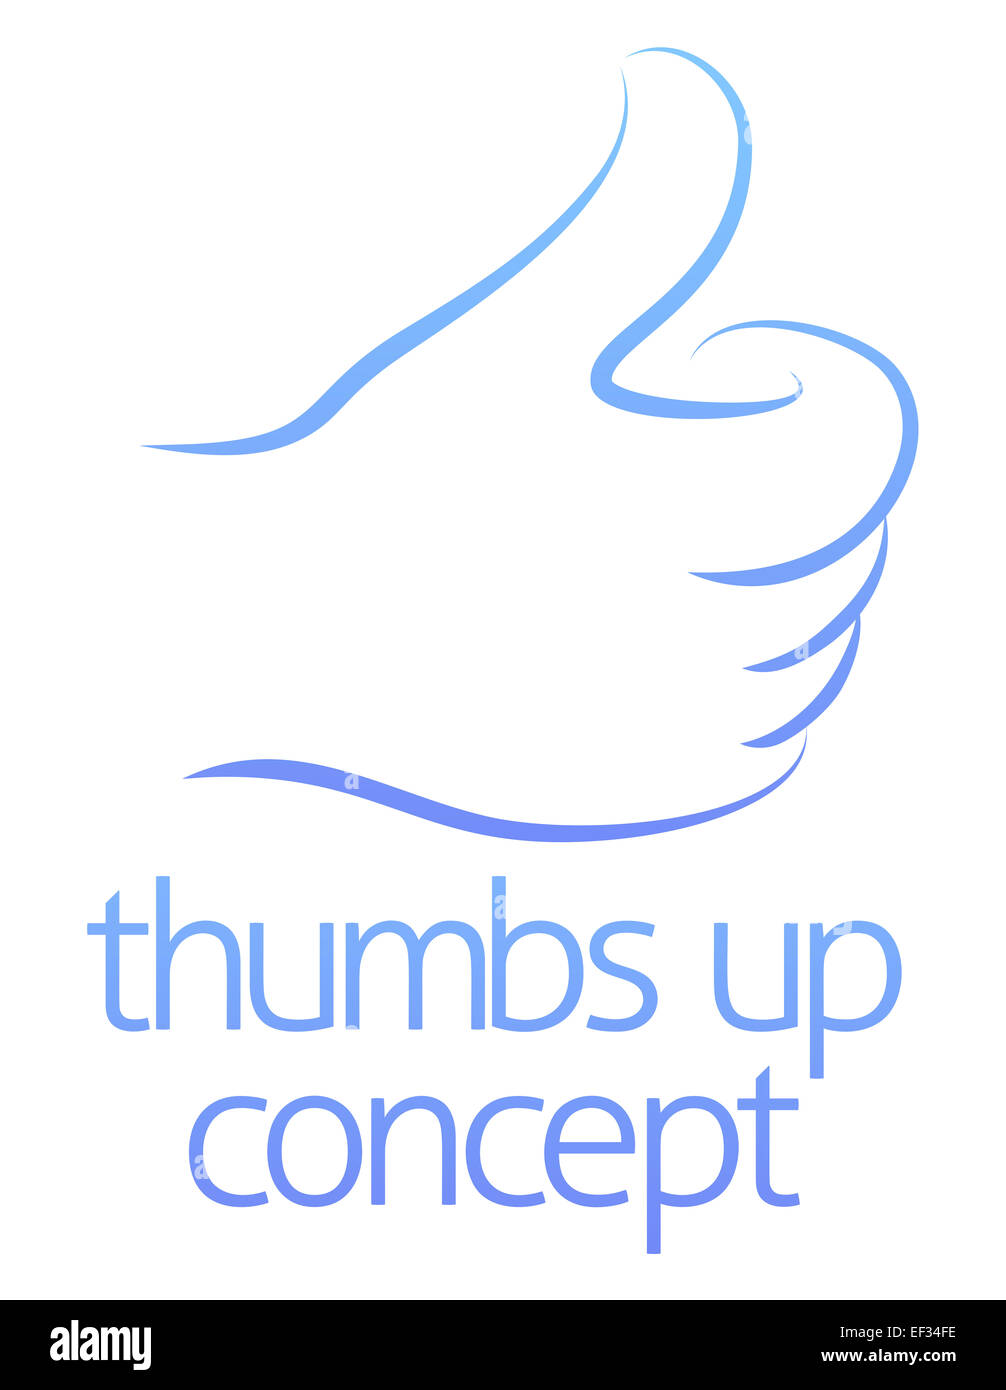 An abstract illustration of a hand giving a thumbs up concept design Stock Photo